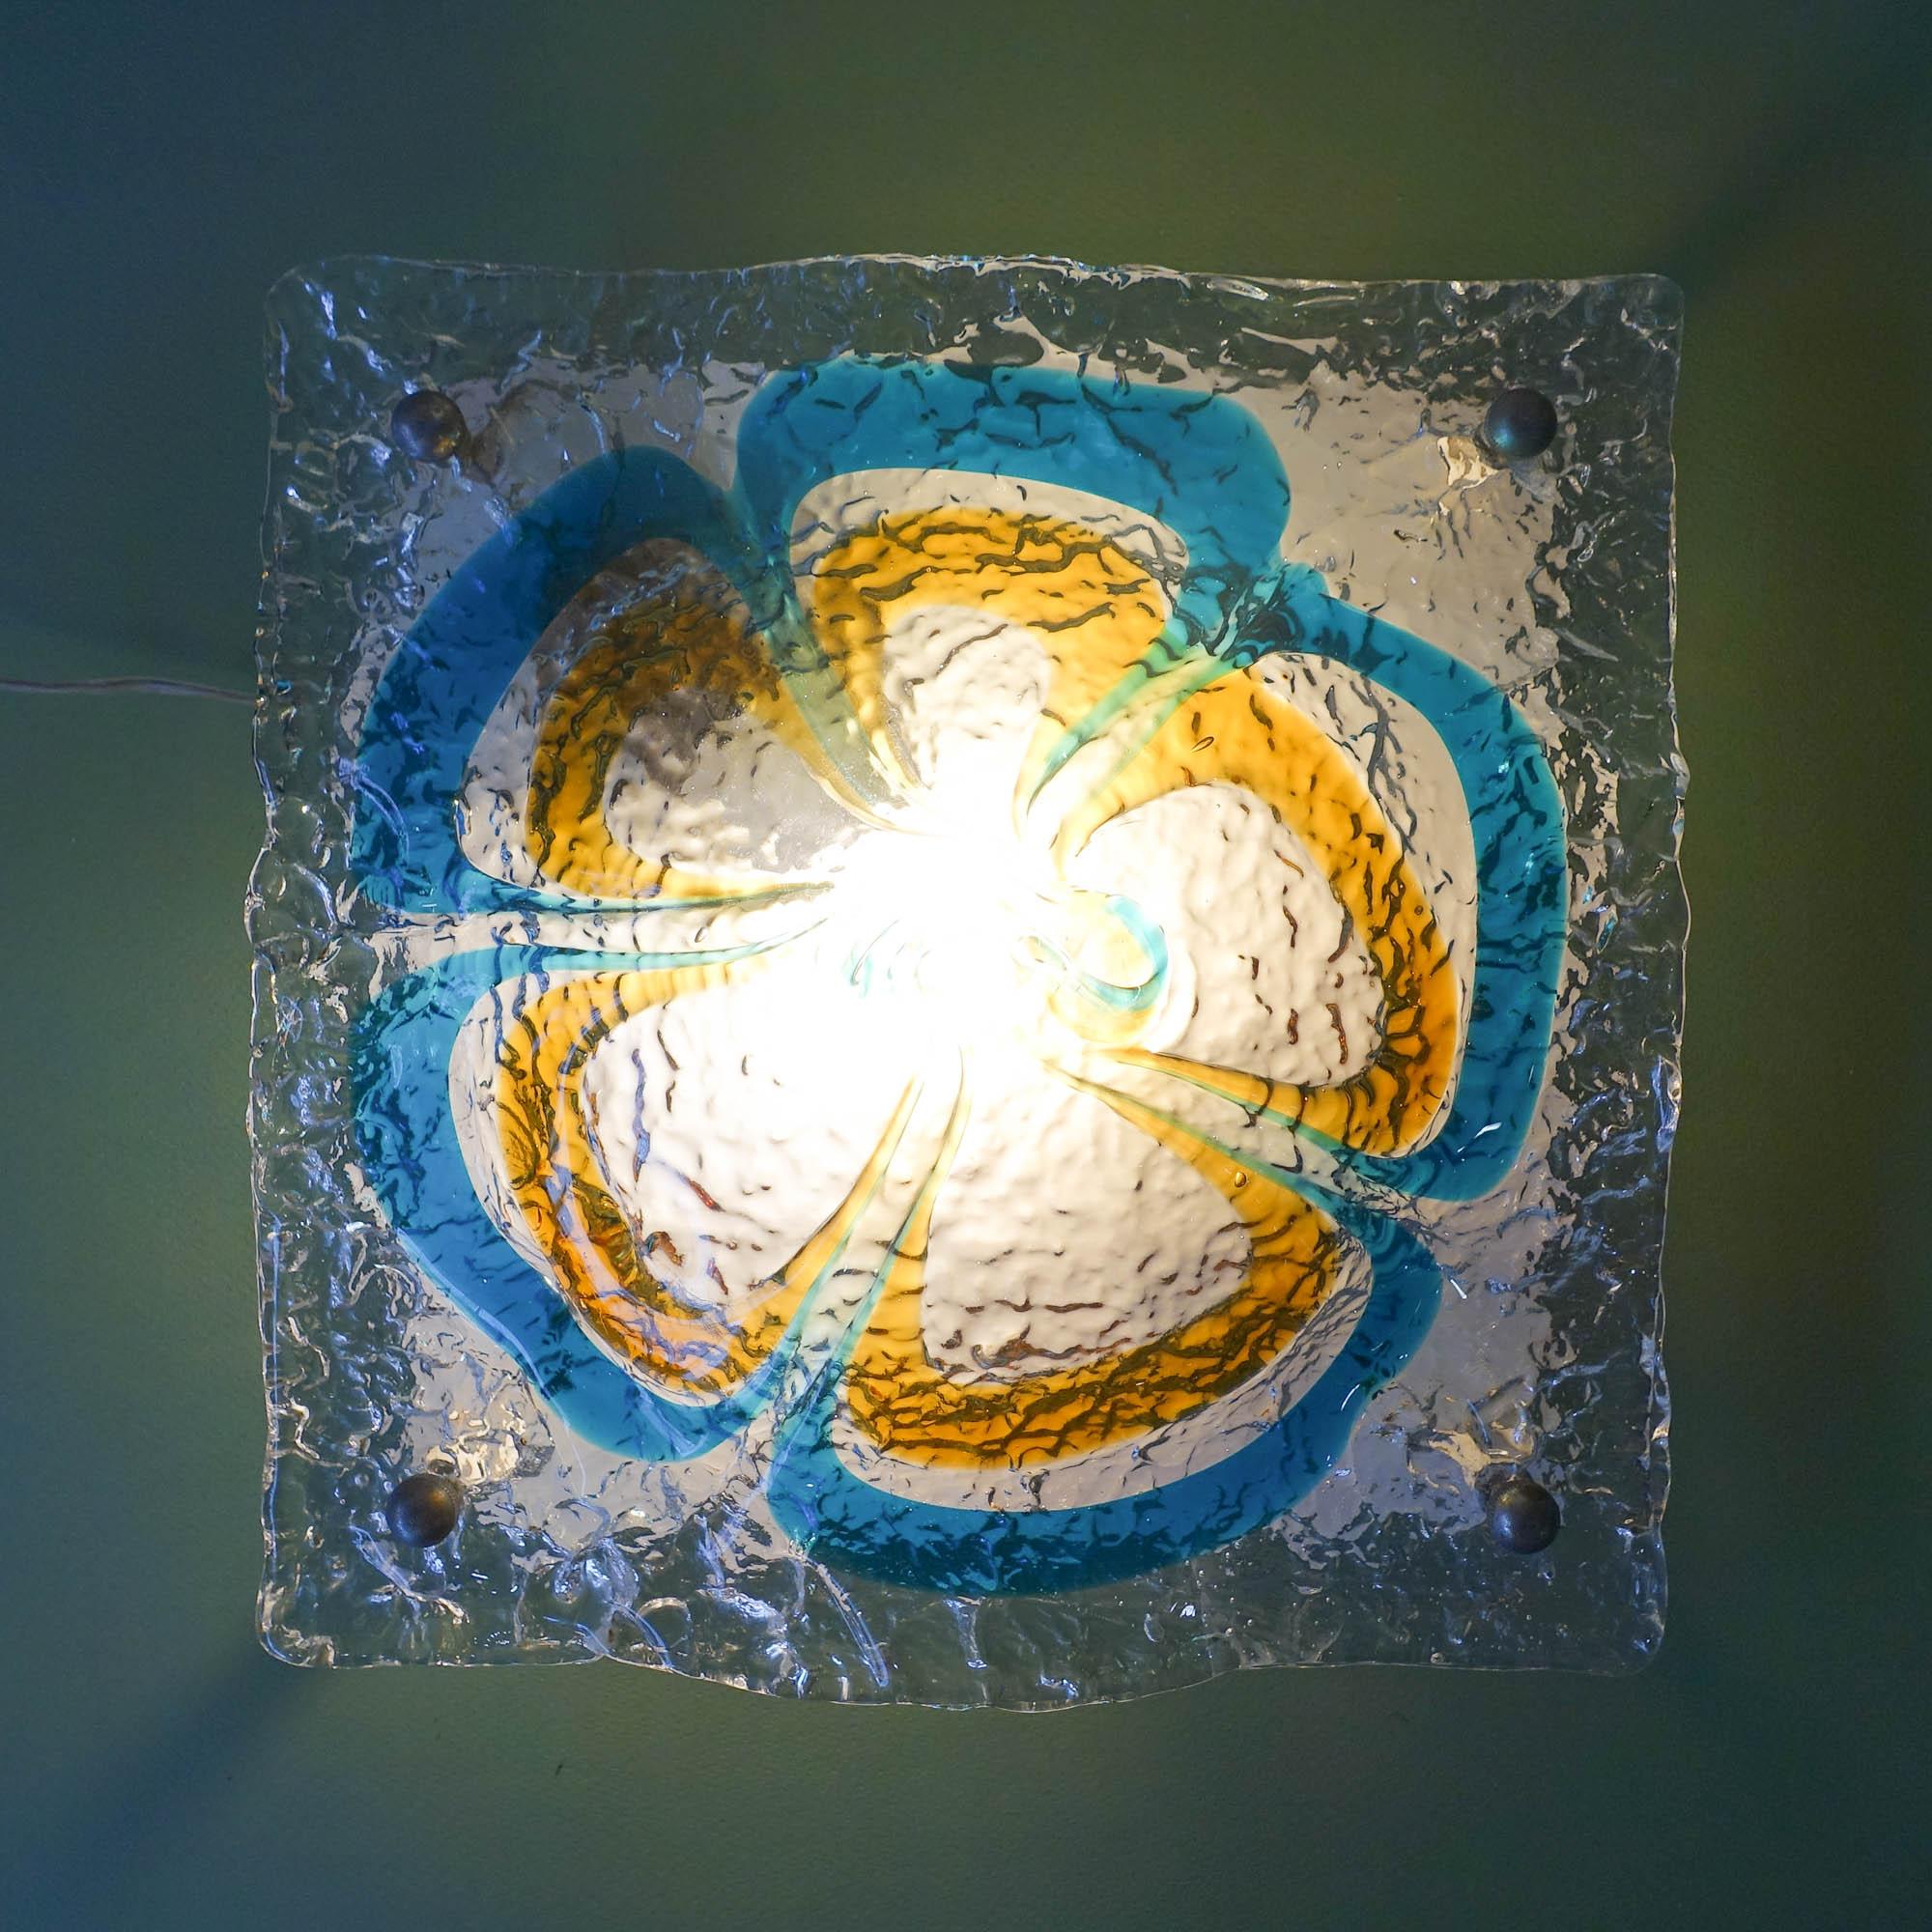 This sconce was designed and produced by Mazzega in Italy, during the 1970's. It features a thick wavy amber, blue and clear Murano glass with a flower-shaped designed, mounted on a white metal wall plate with spherical polished chrome fittings. It